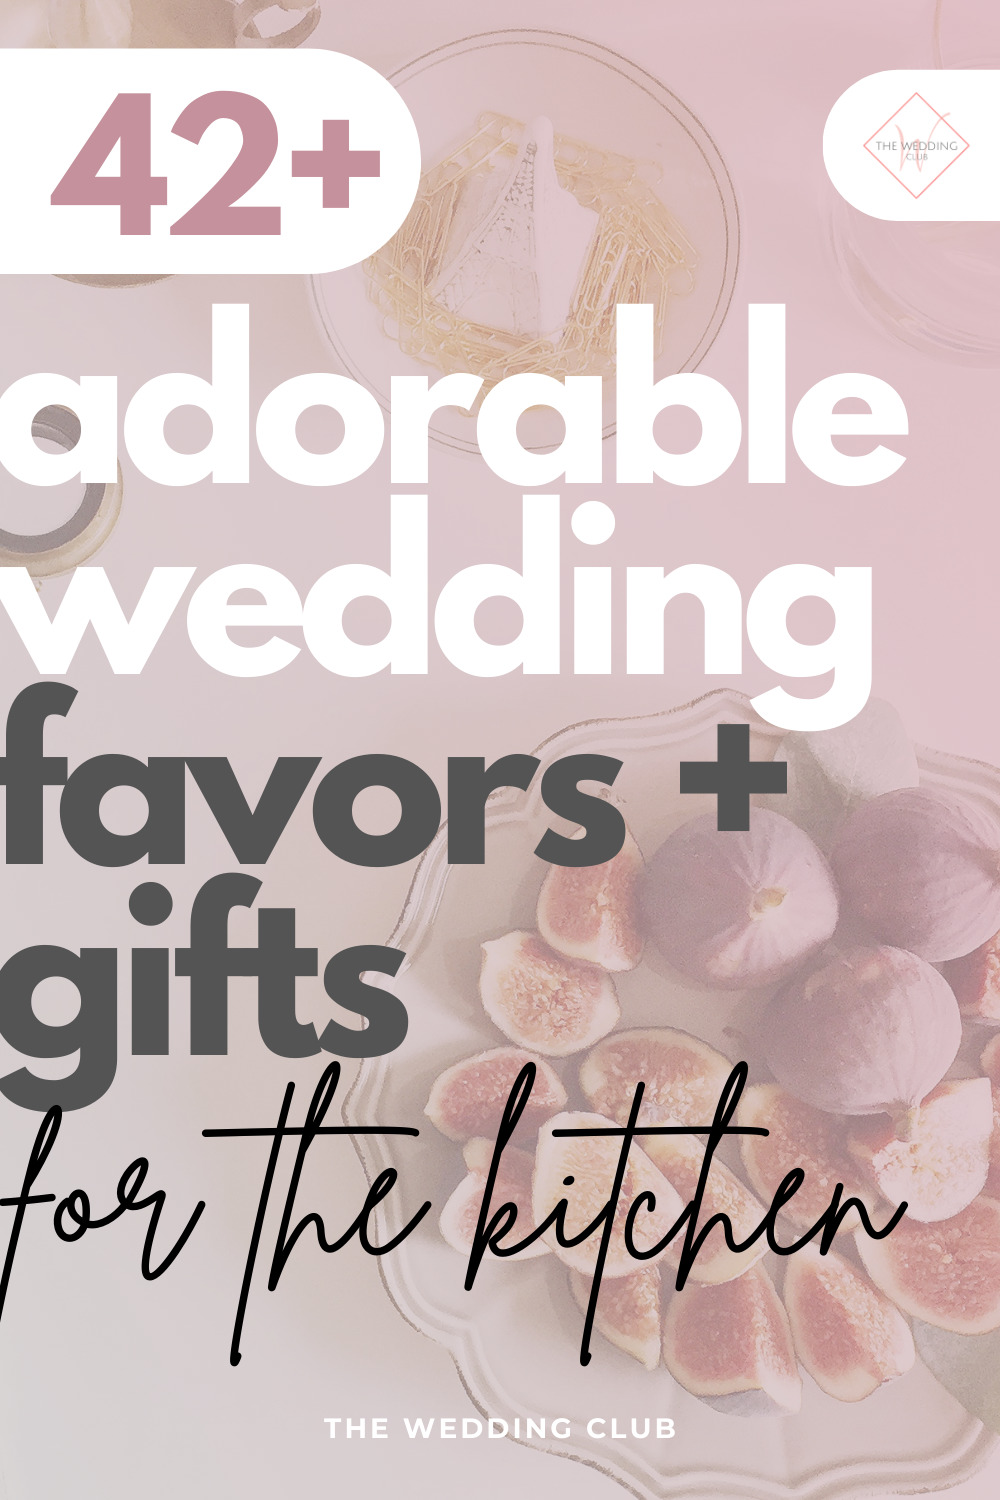 42+ Adorable wedding favors and gifts for the kitchen